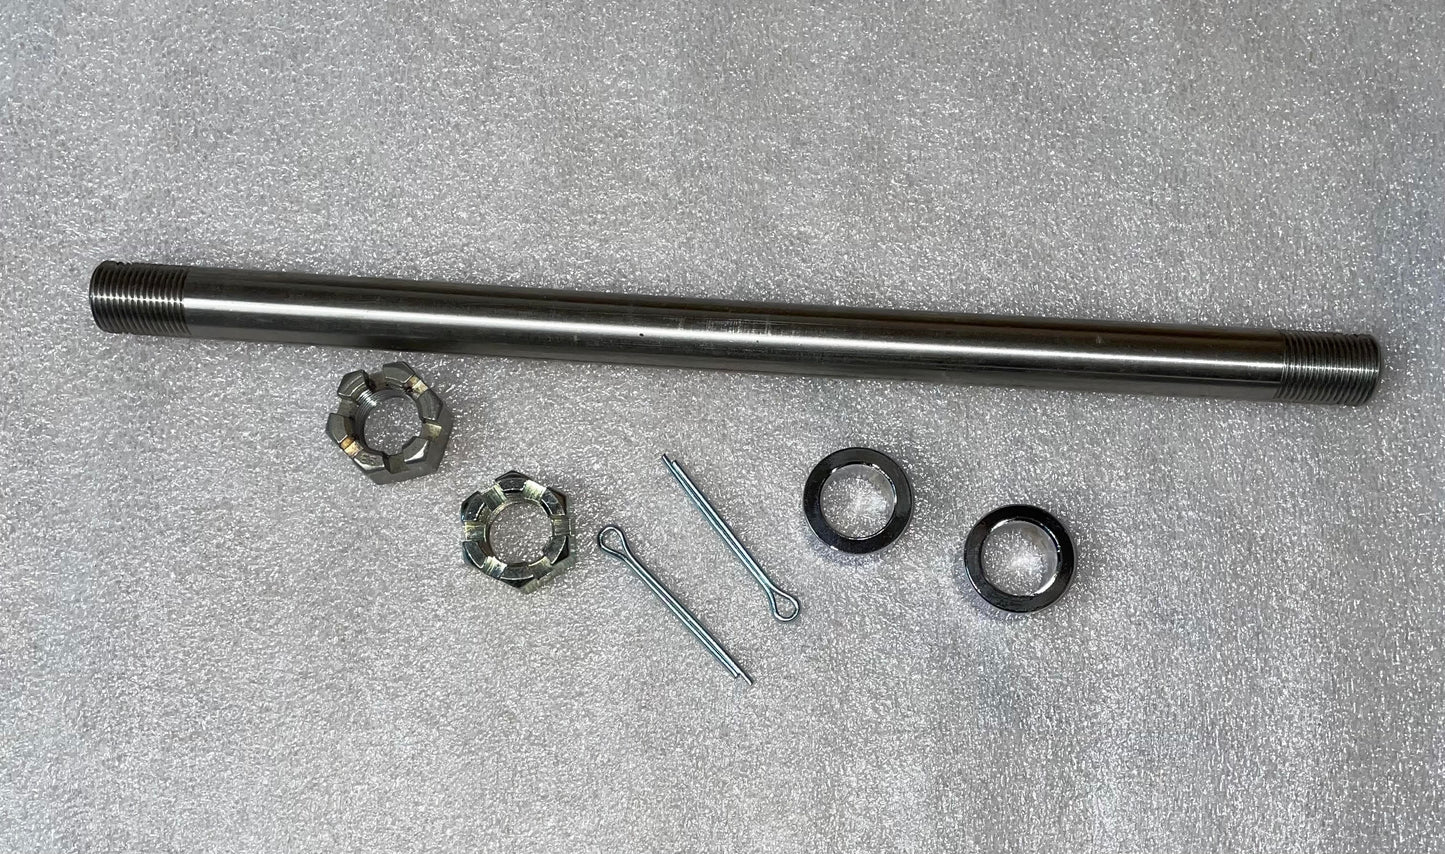 Axle Kit for 82-03 Road 6 Customs 200 hardtail frames